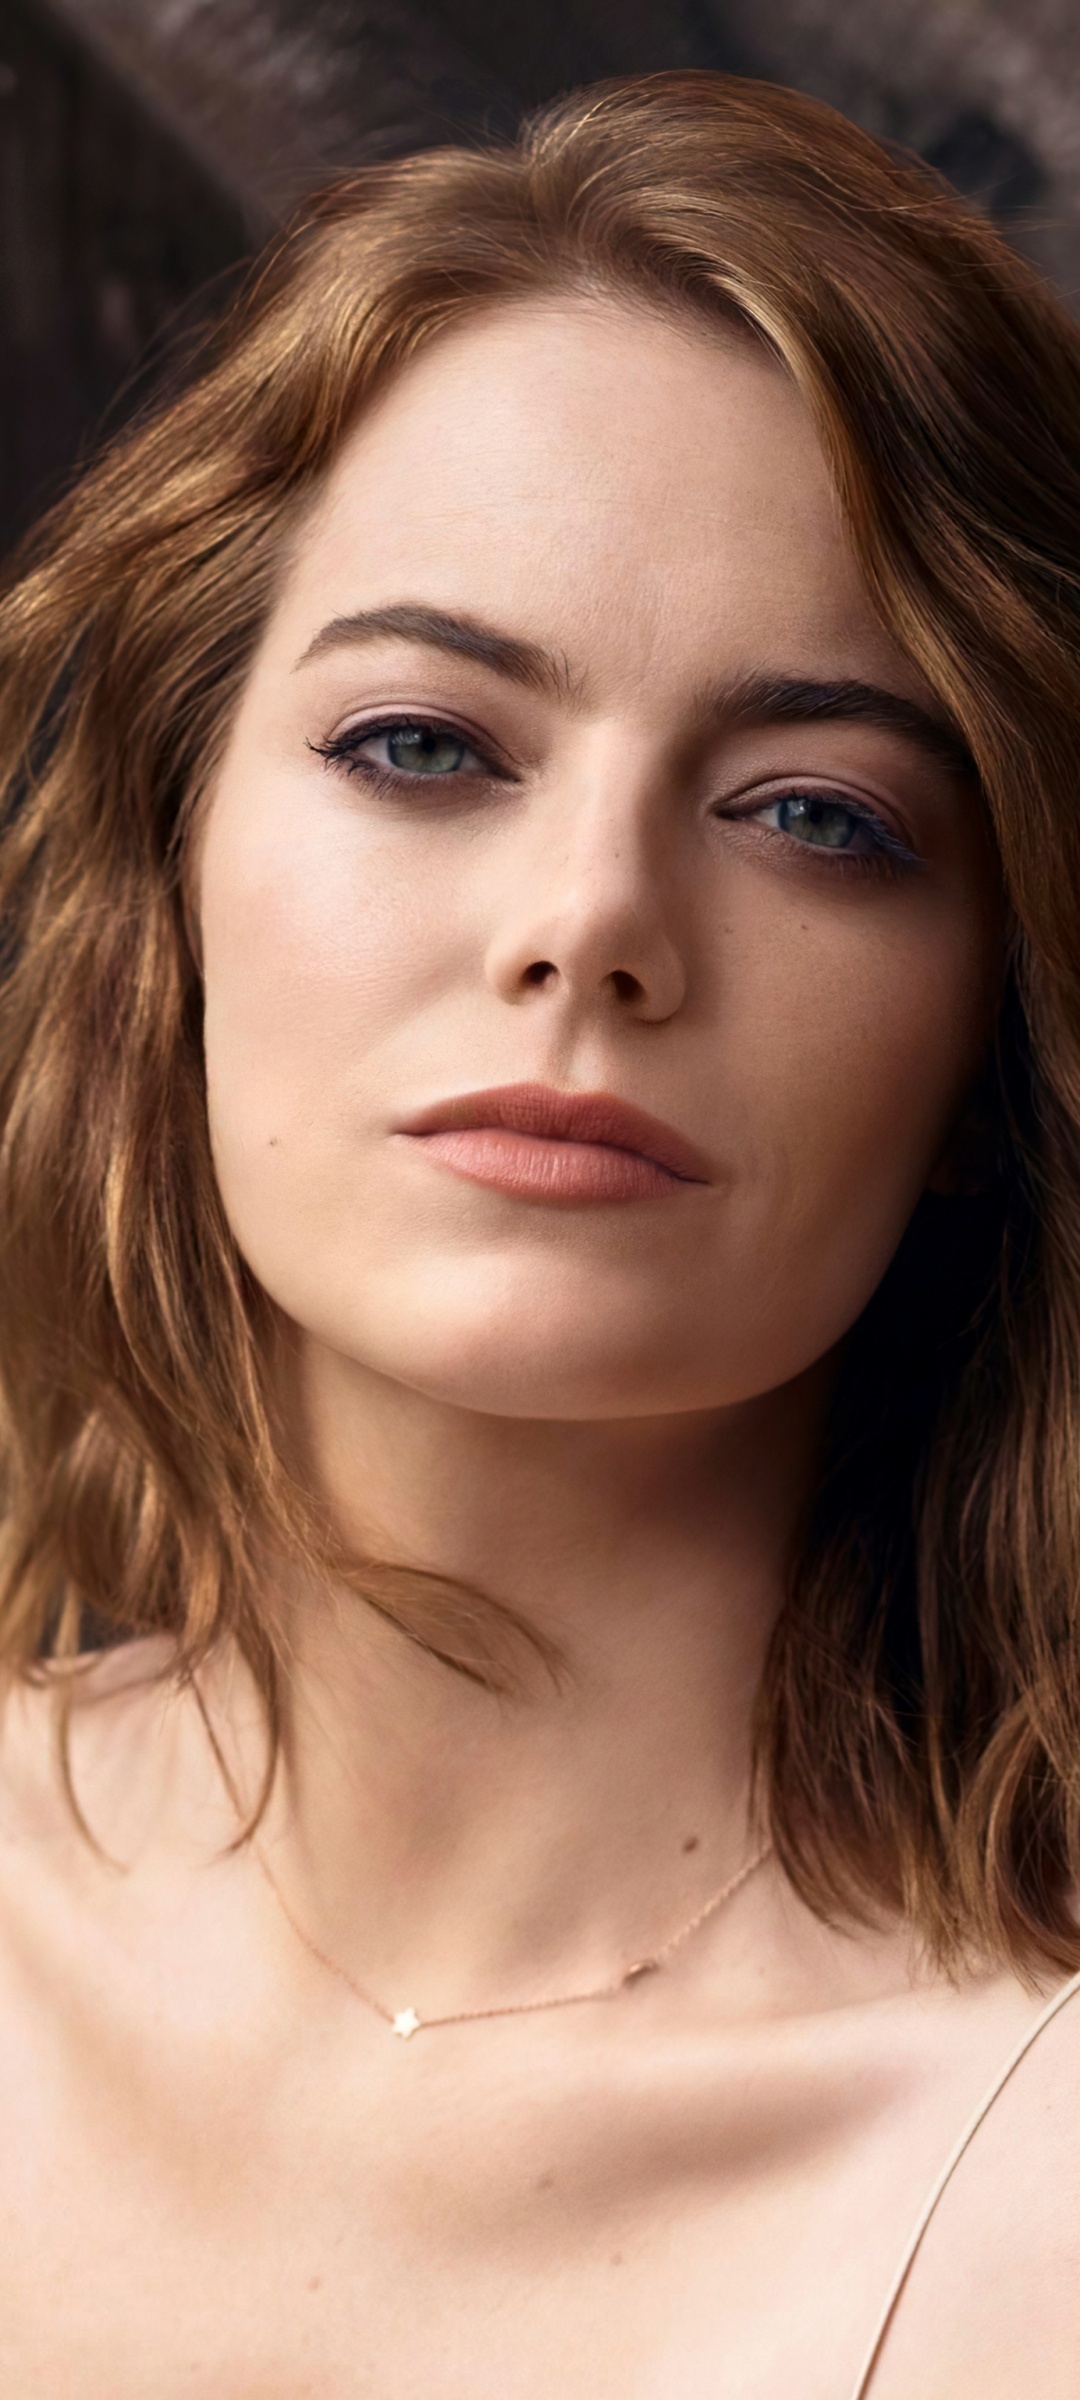 Emma Stone movies, 4K wallpapers, American actress, Captivating portrait, 1080x2400 HD Phone